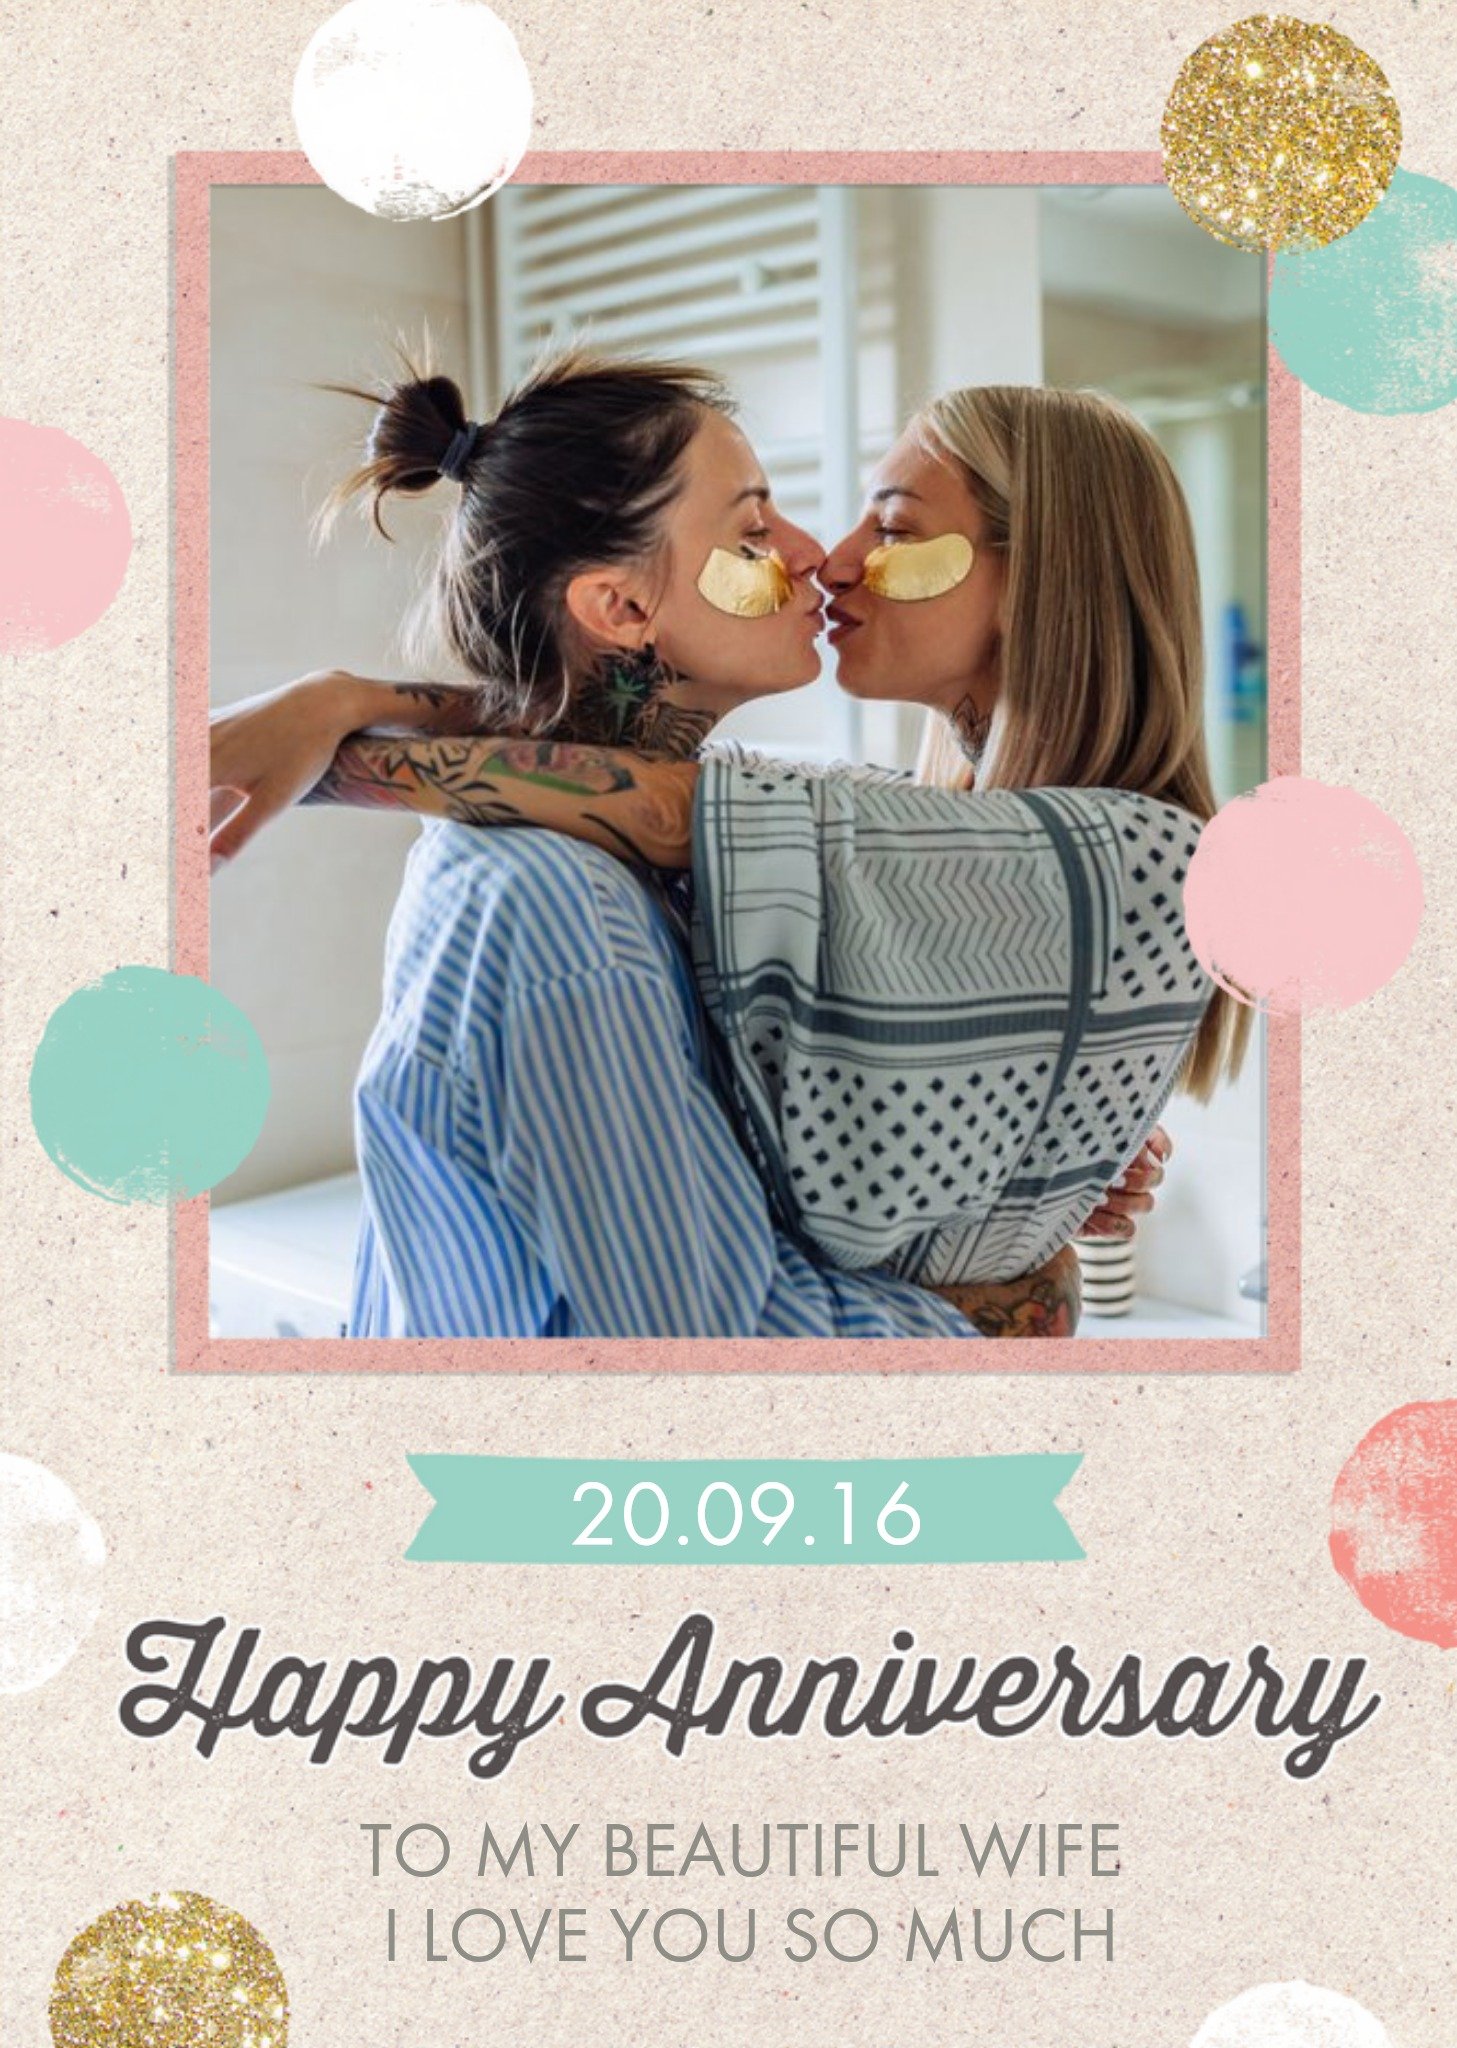 Moonpig Printed Craft Paper Photo Upload Anniversary Card For Your Wife Ecard